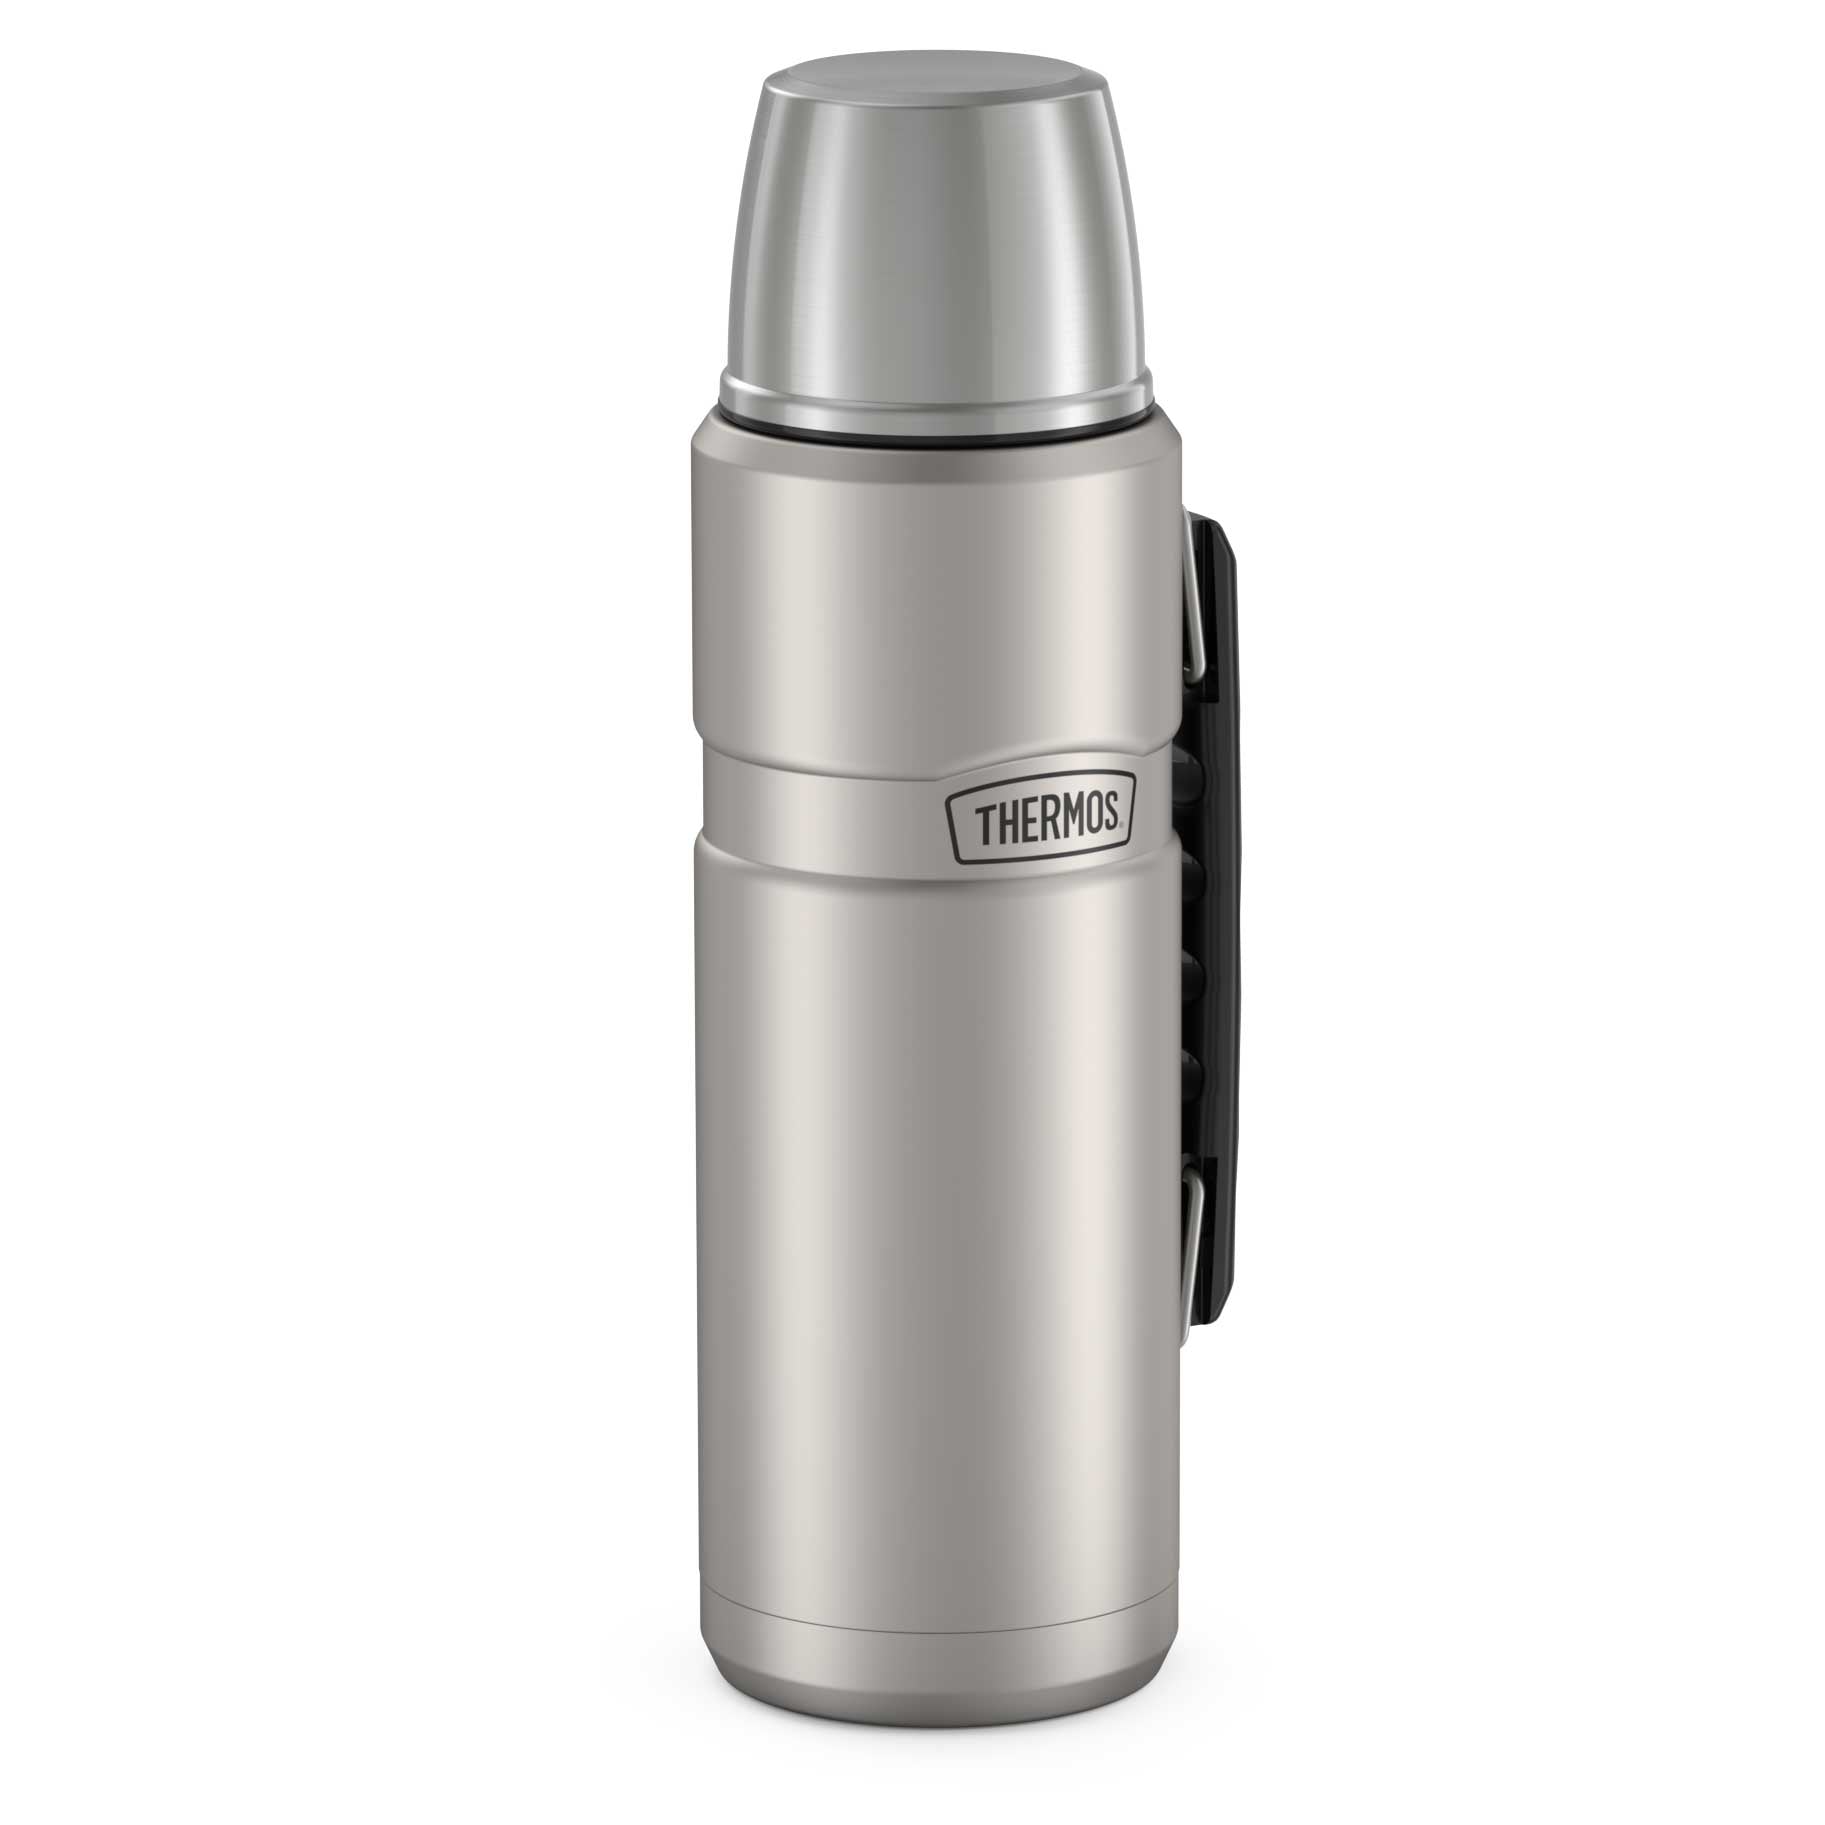 Engraved Thermos Stainless King 40oz Beverage Bottle Personalized Stainless  Steel Thermos Brand Mug Personalized Coffee Travel Mug 